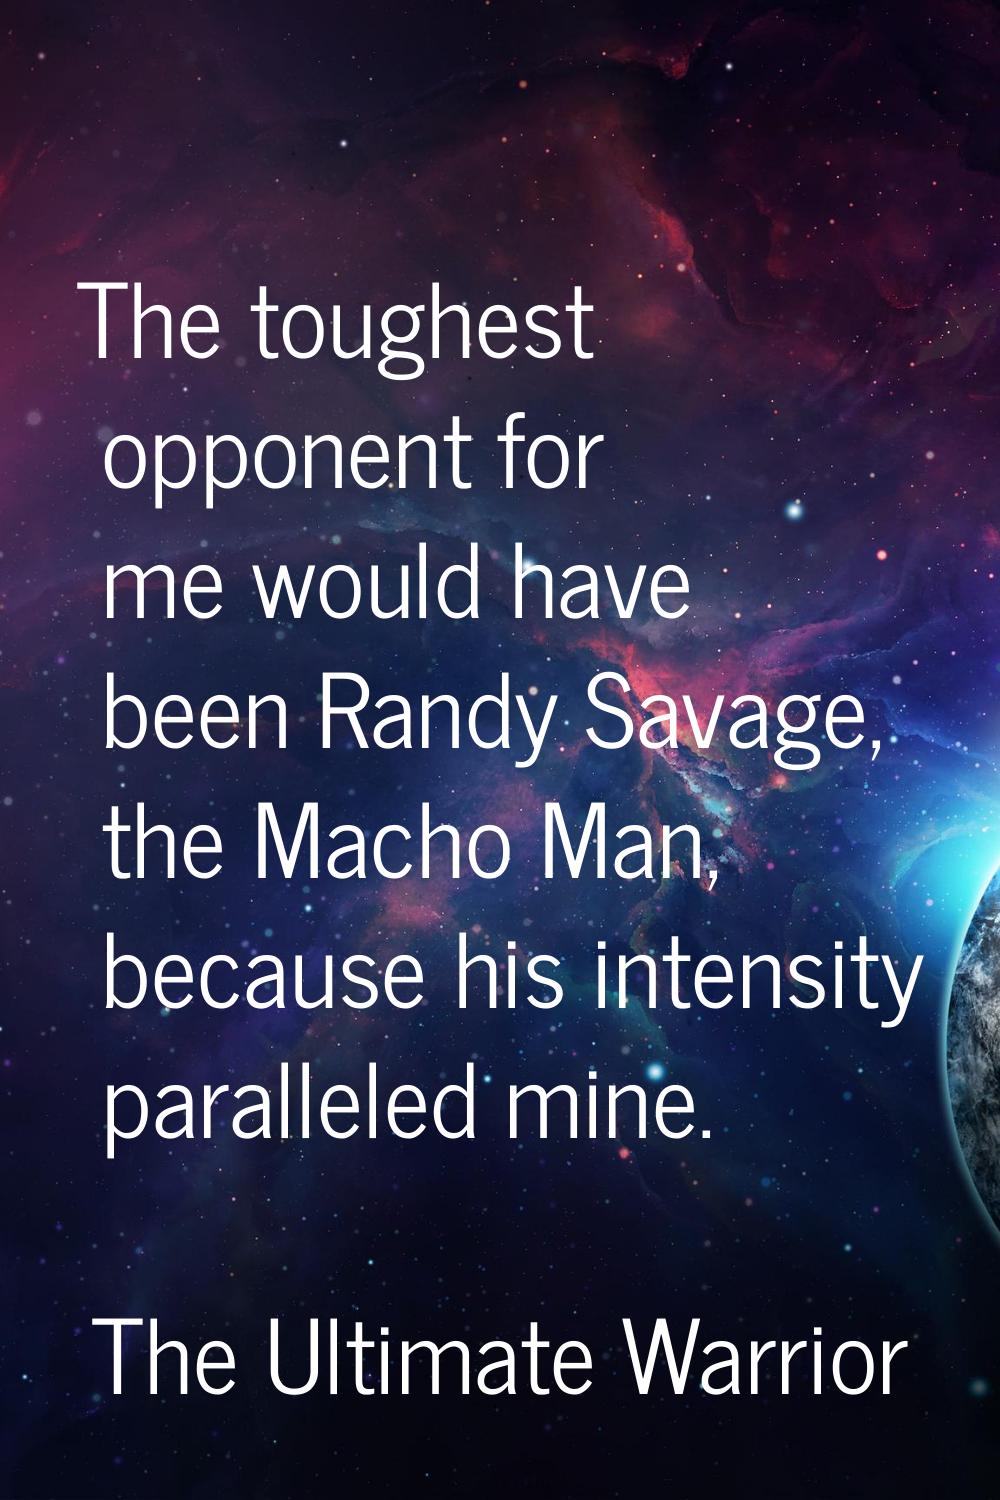 The toughest opponent for me would have been Randy Savage, the Macho Man, because his intensity par